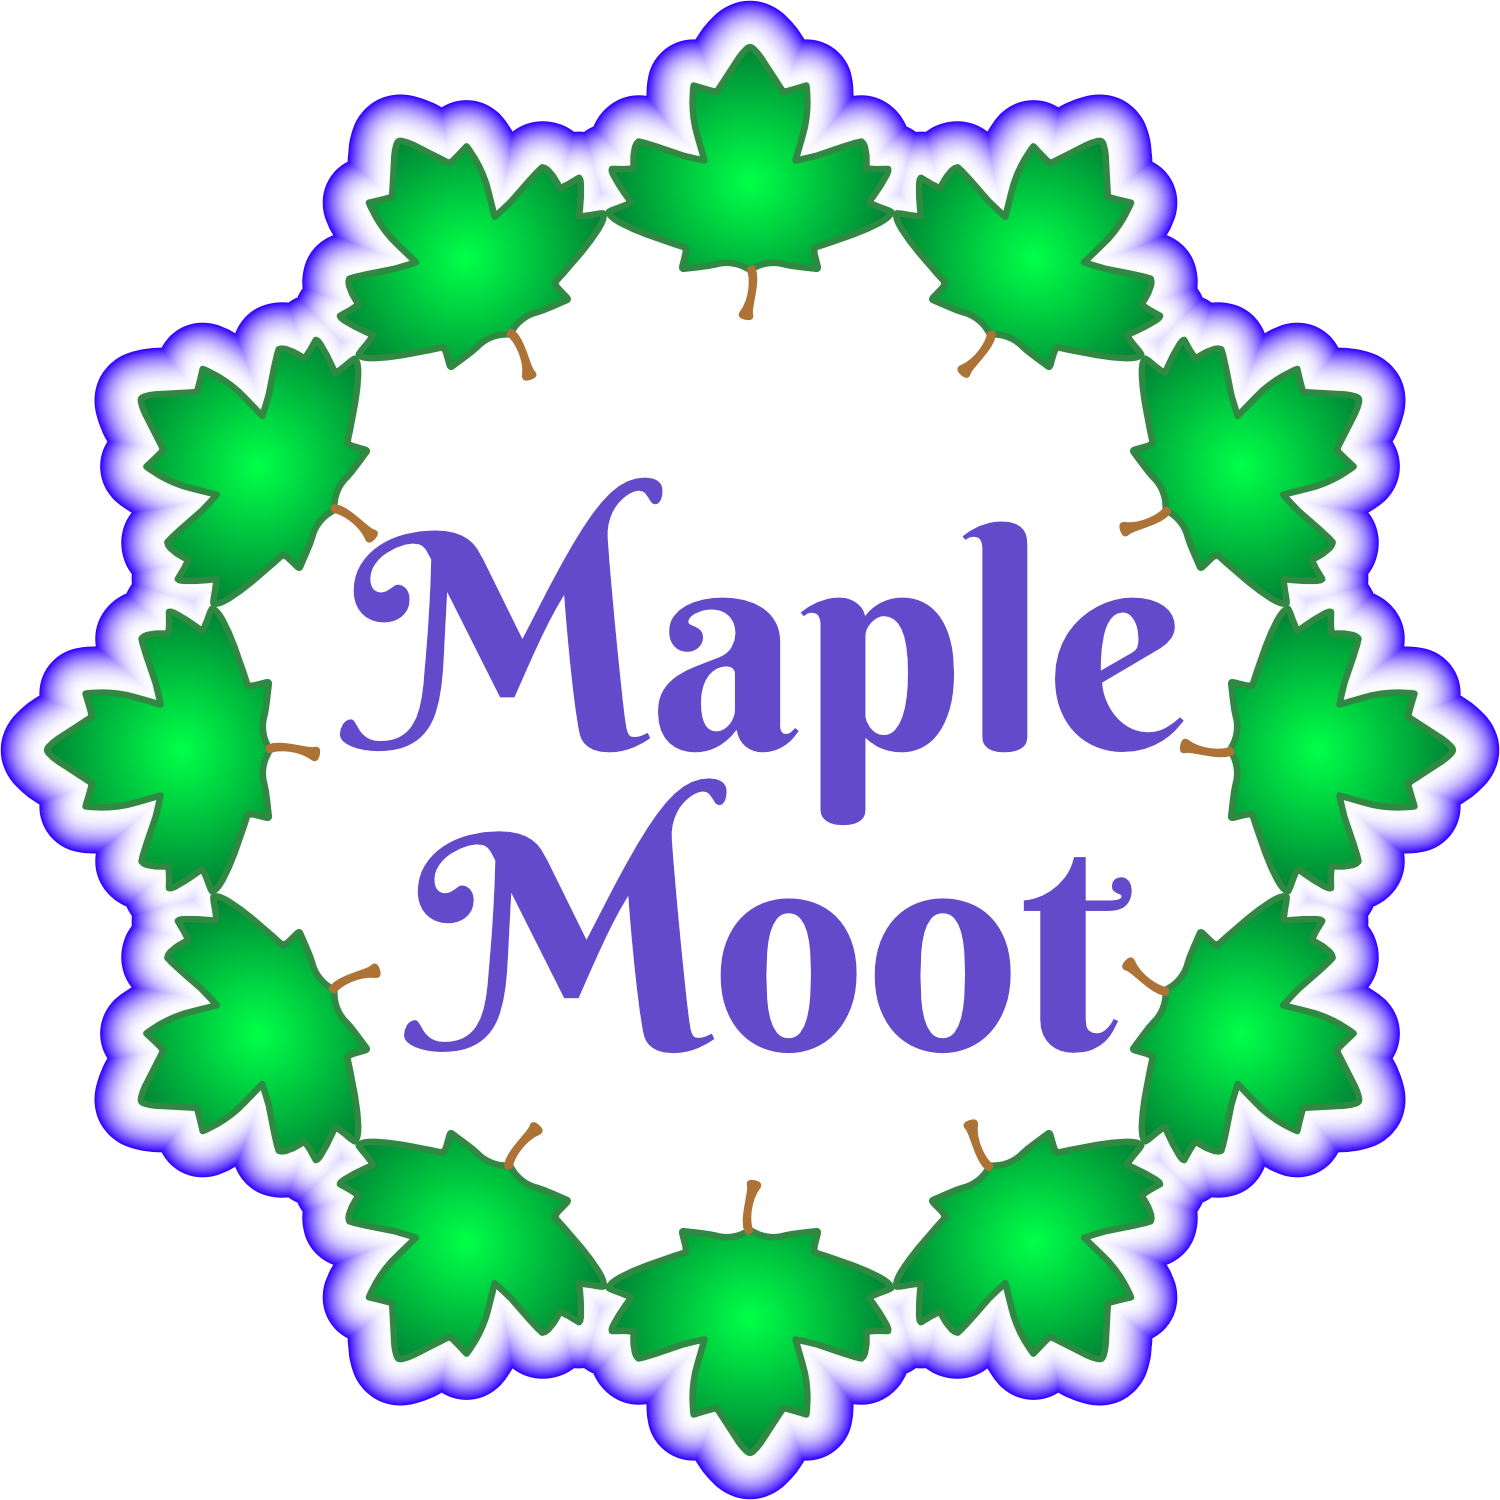 A circle of spring green maple leaves surrounds the words "Maple Moot."